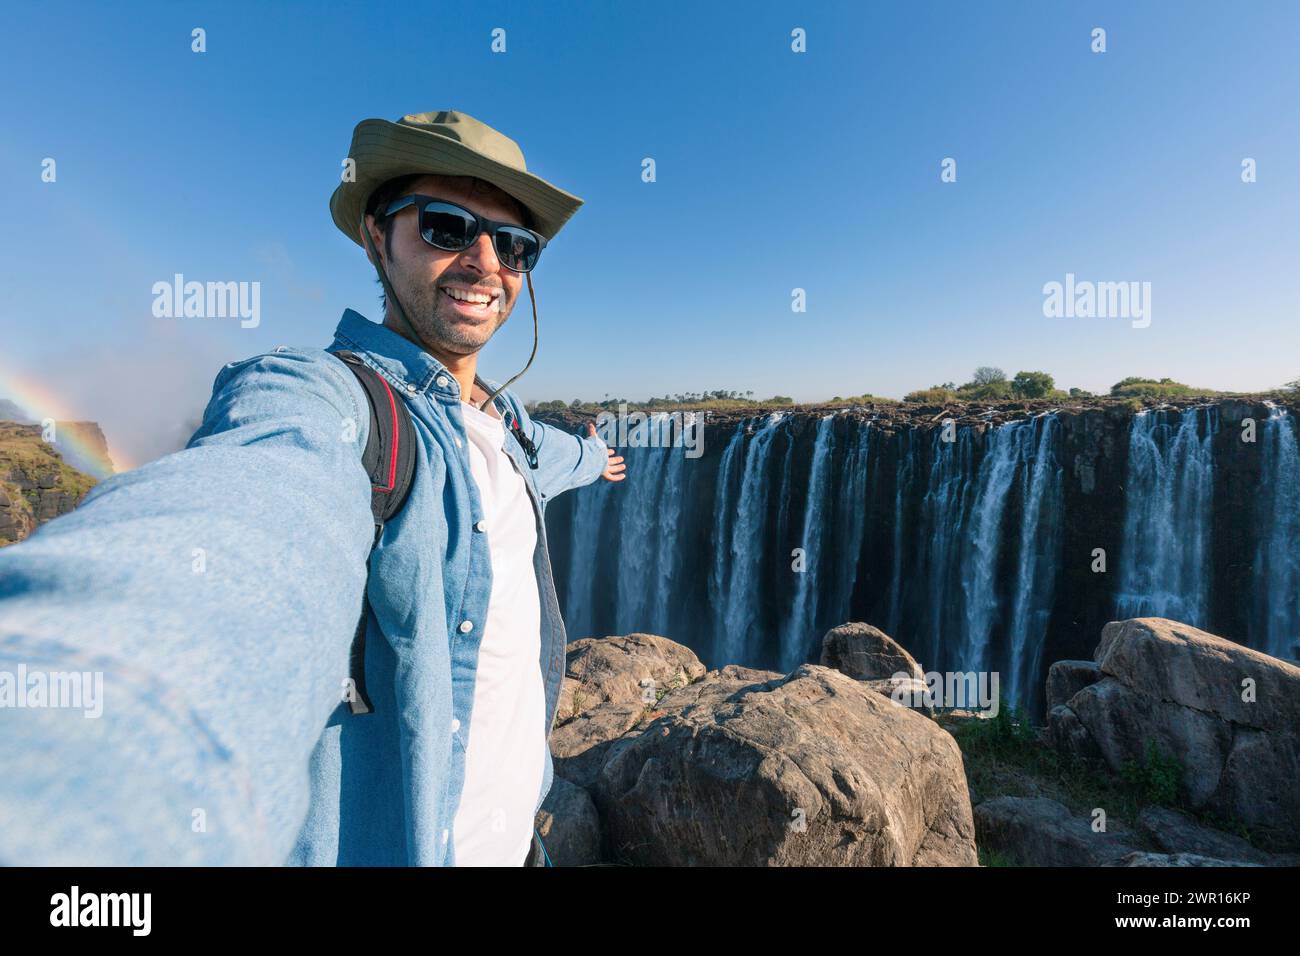 A tourist takes a selfie at Victoria Falls on the Zambezi River, located on the border between Zambia and Zimbabwe, the largest waterfall in the world Stock Photo